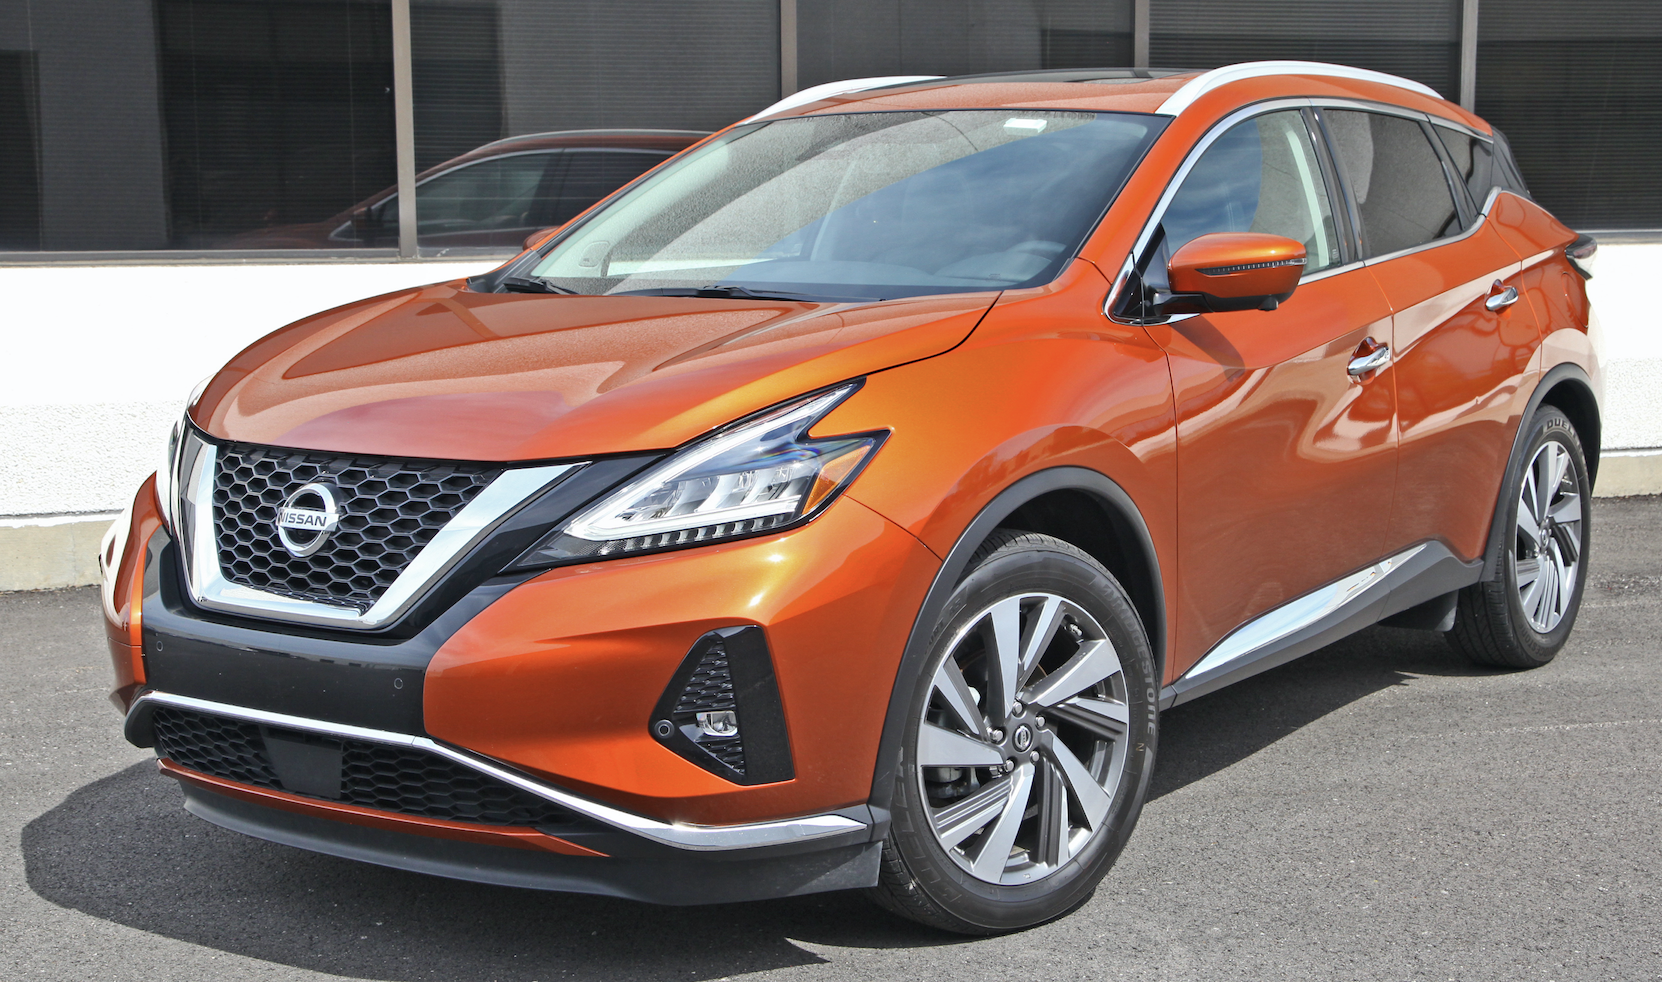 2019 Nissan Murano The Daily Drive | Consumer Guide®